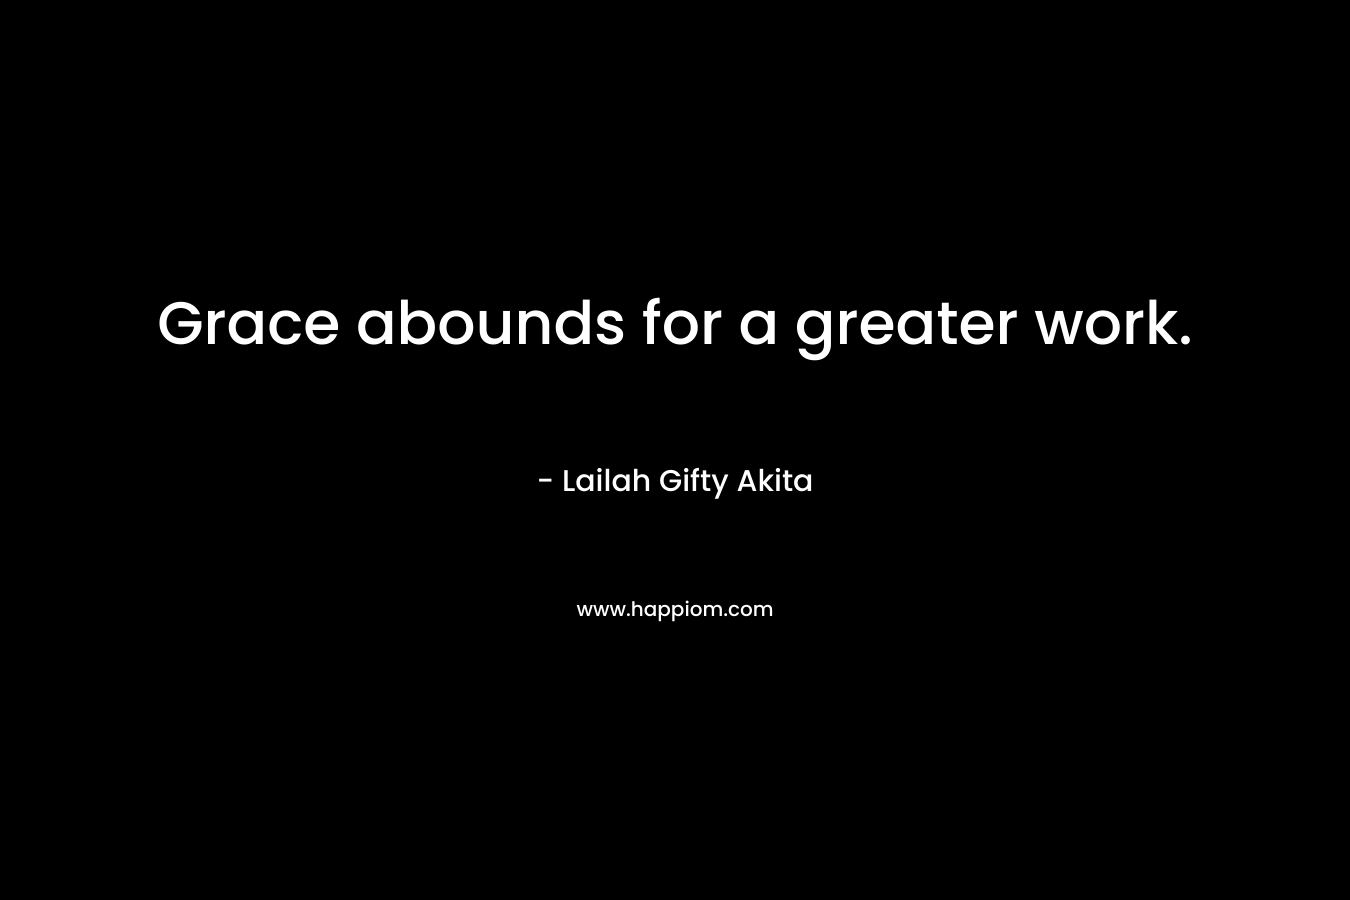 Grace abounds for a greater work. – Lailah Gifty Akita